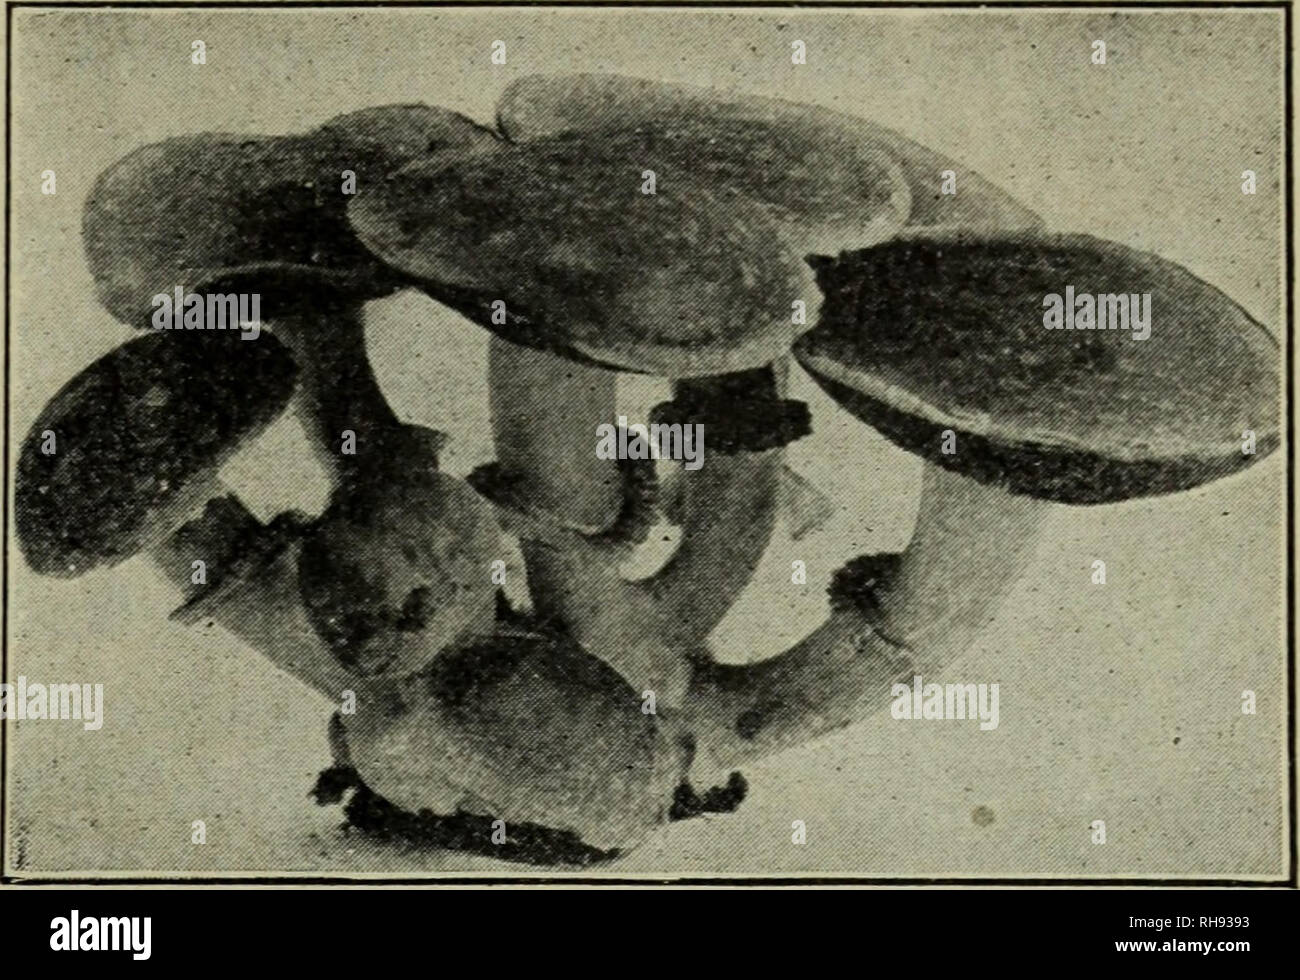 . Botany for high schools. Botany. FUNGI: GILL FUNGI. Fig. 268. The cultivated mushroom (Agaricus campestris). cap is attached directly to the substratum. These thin plates, or lamellcEj are covered with the club-shaped structures, or basididj vvhich are characteristic of the basidium fungi. Where these basidia stand side by side covering extensive surfaces, as in the higher basidium fungi, they form a fruiting surface or hymeninm. The sur- face of the gills then is the fruiting surface of the gill fungi. Two to four spores, usually four, are borne on each basidium. 460. The common mushroom (A Stock Photo